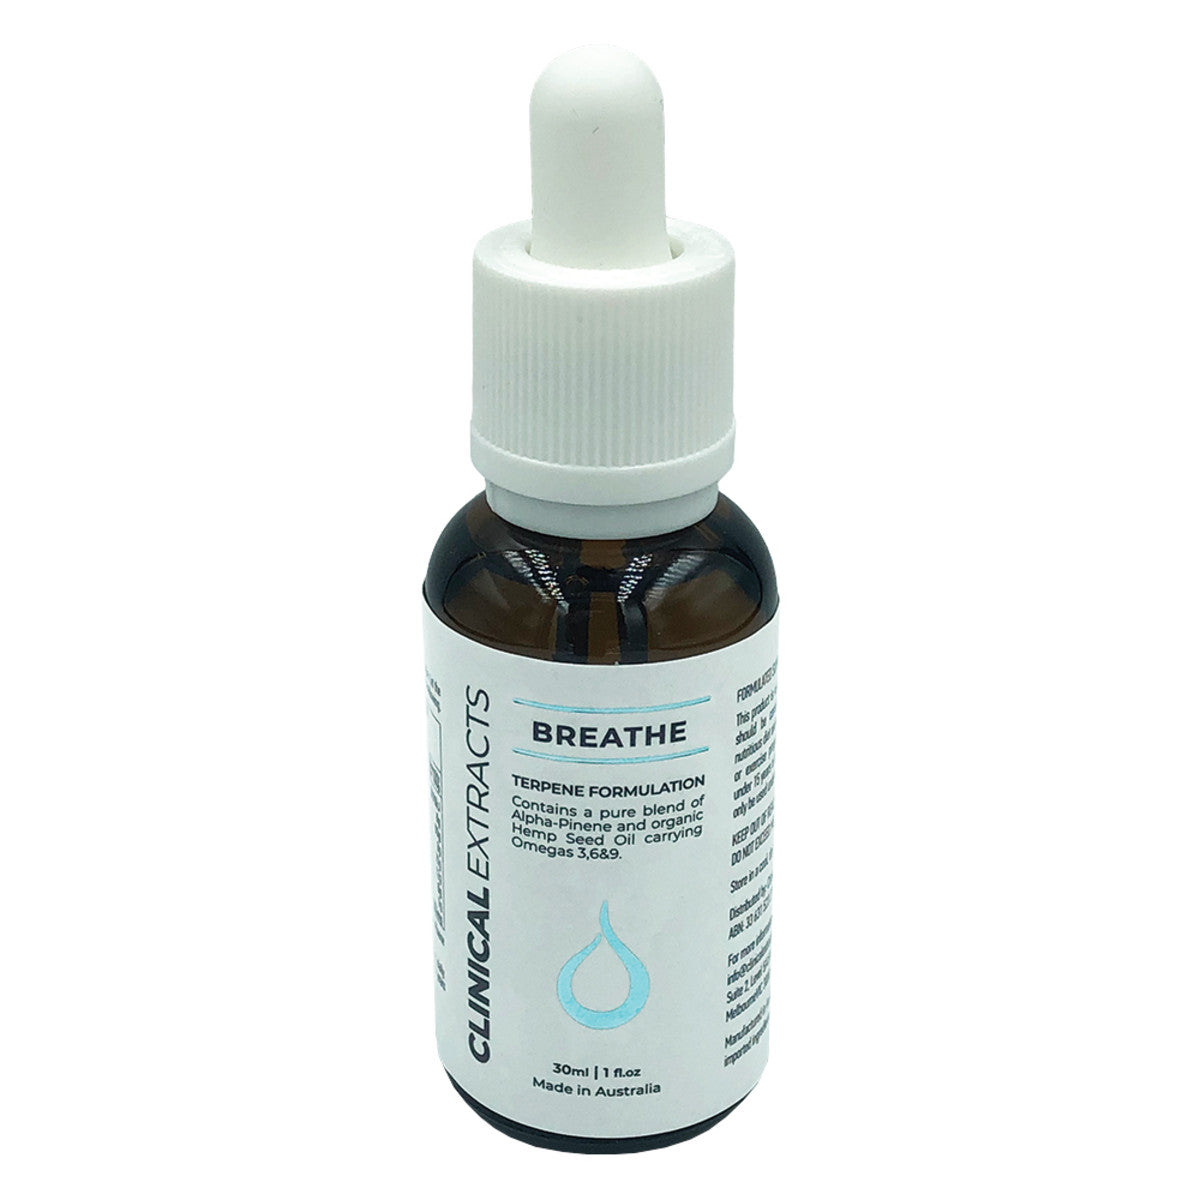 Clinical Extracts - Terpene Formulation Breathe